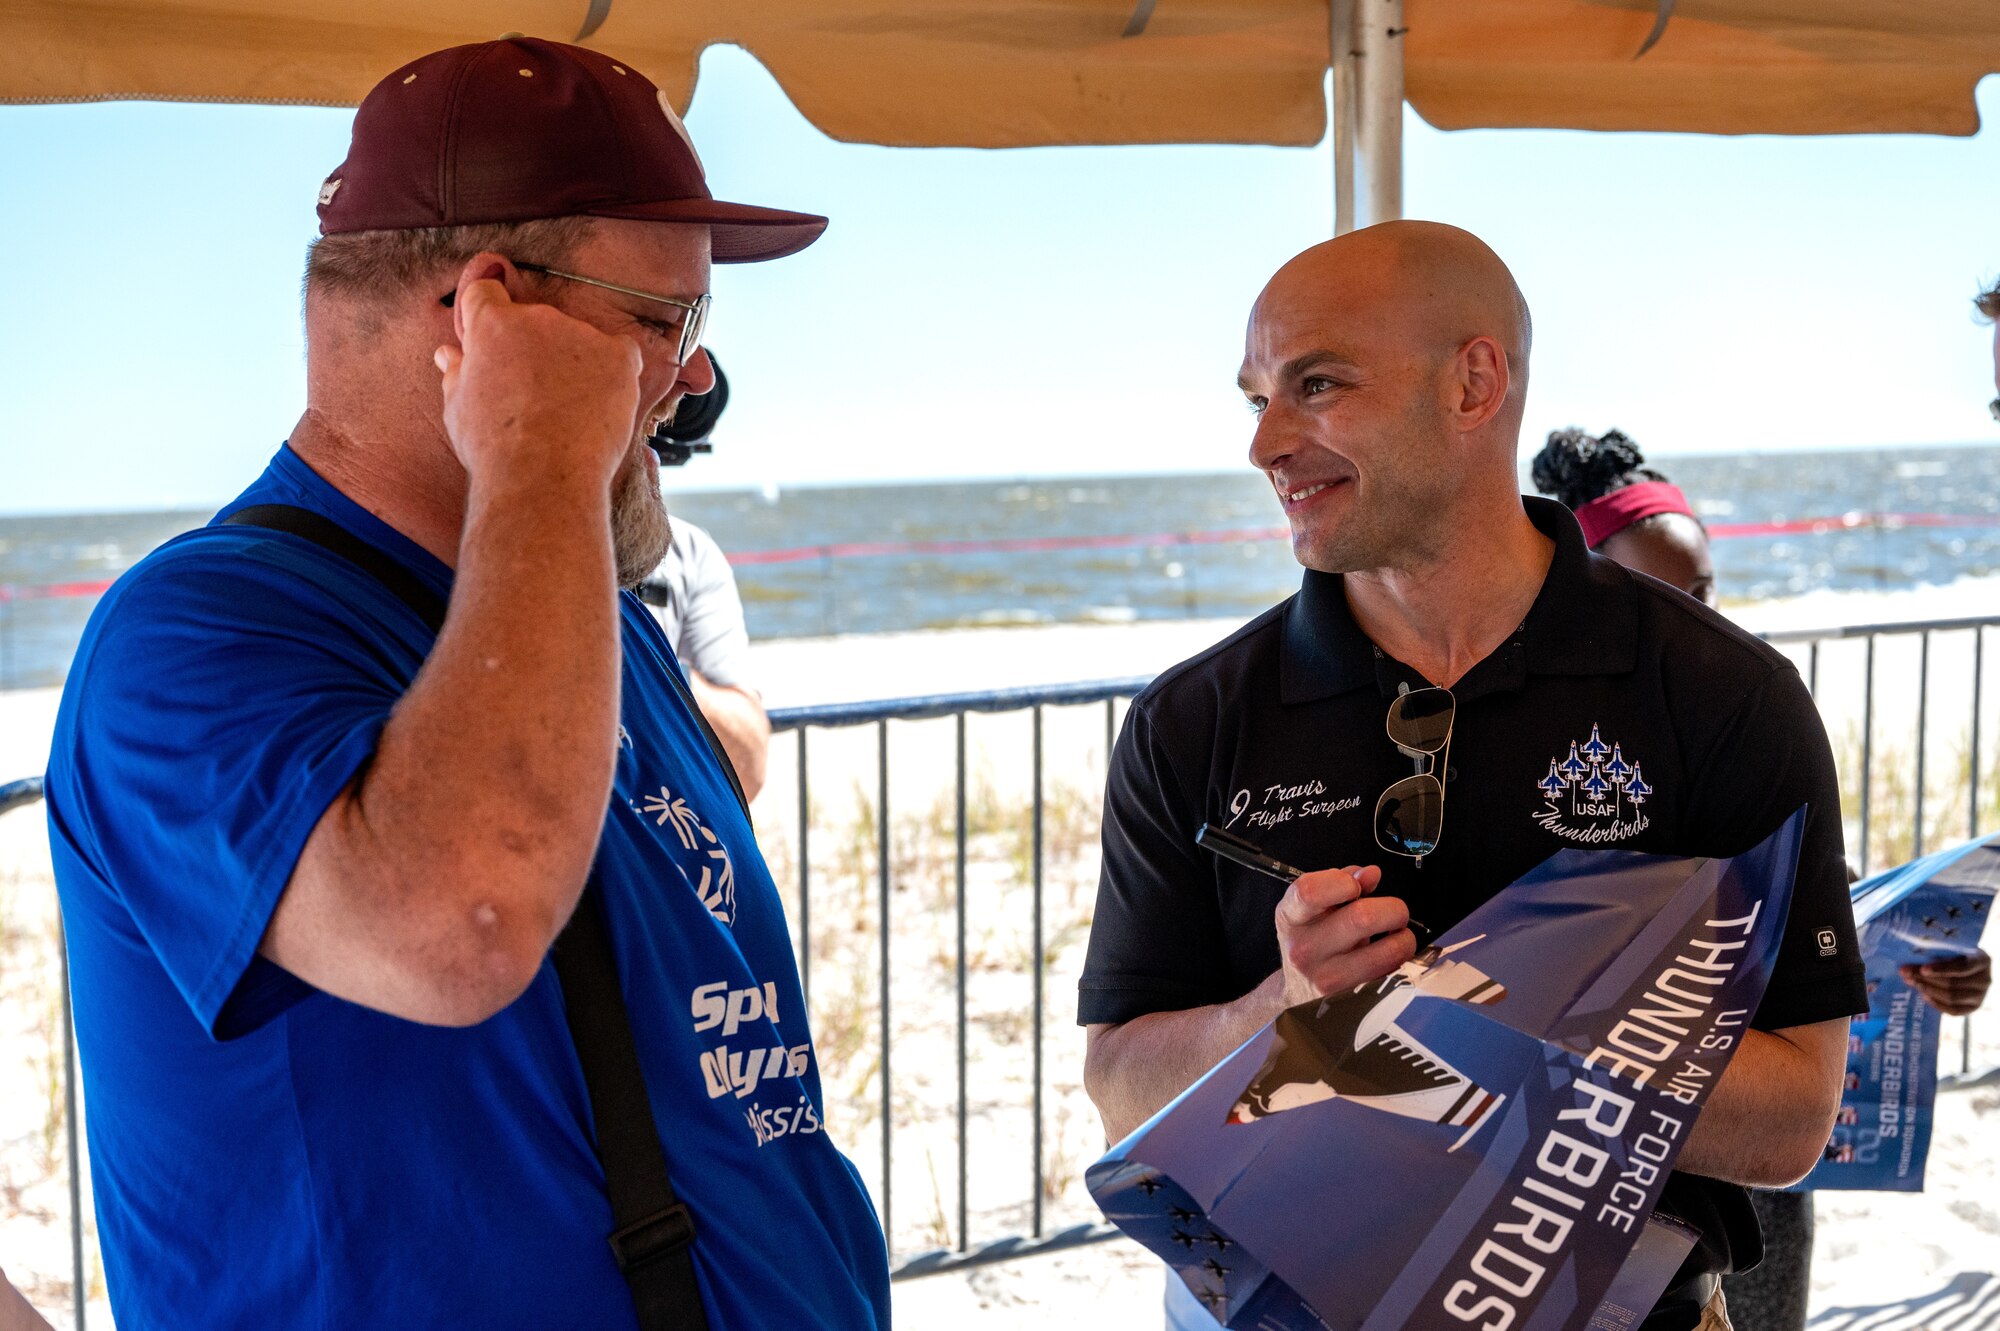 U.S. Air Force Maj. Travis Grindstaff, Thunderbird 9 flight surgeon, converses with Special Olympics Mississippi athletes and guests during a Thunderbirds meet and greet at Biloxi Beach in Biloxi, Mississippi, April 28, 2023. SOMS athletes and their guests were able to view a practice session for the 2023 Thunder Over the Sound Air and Space Show and meet the Thunderbirds. (U.S. Air Force photo by Airman 1st Class Trenten Walters)